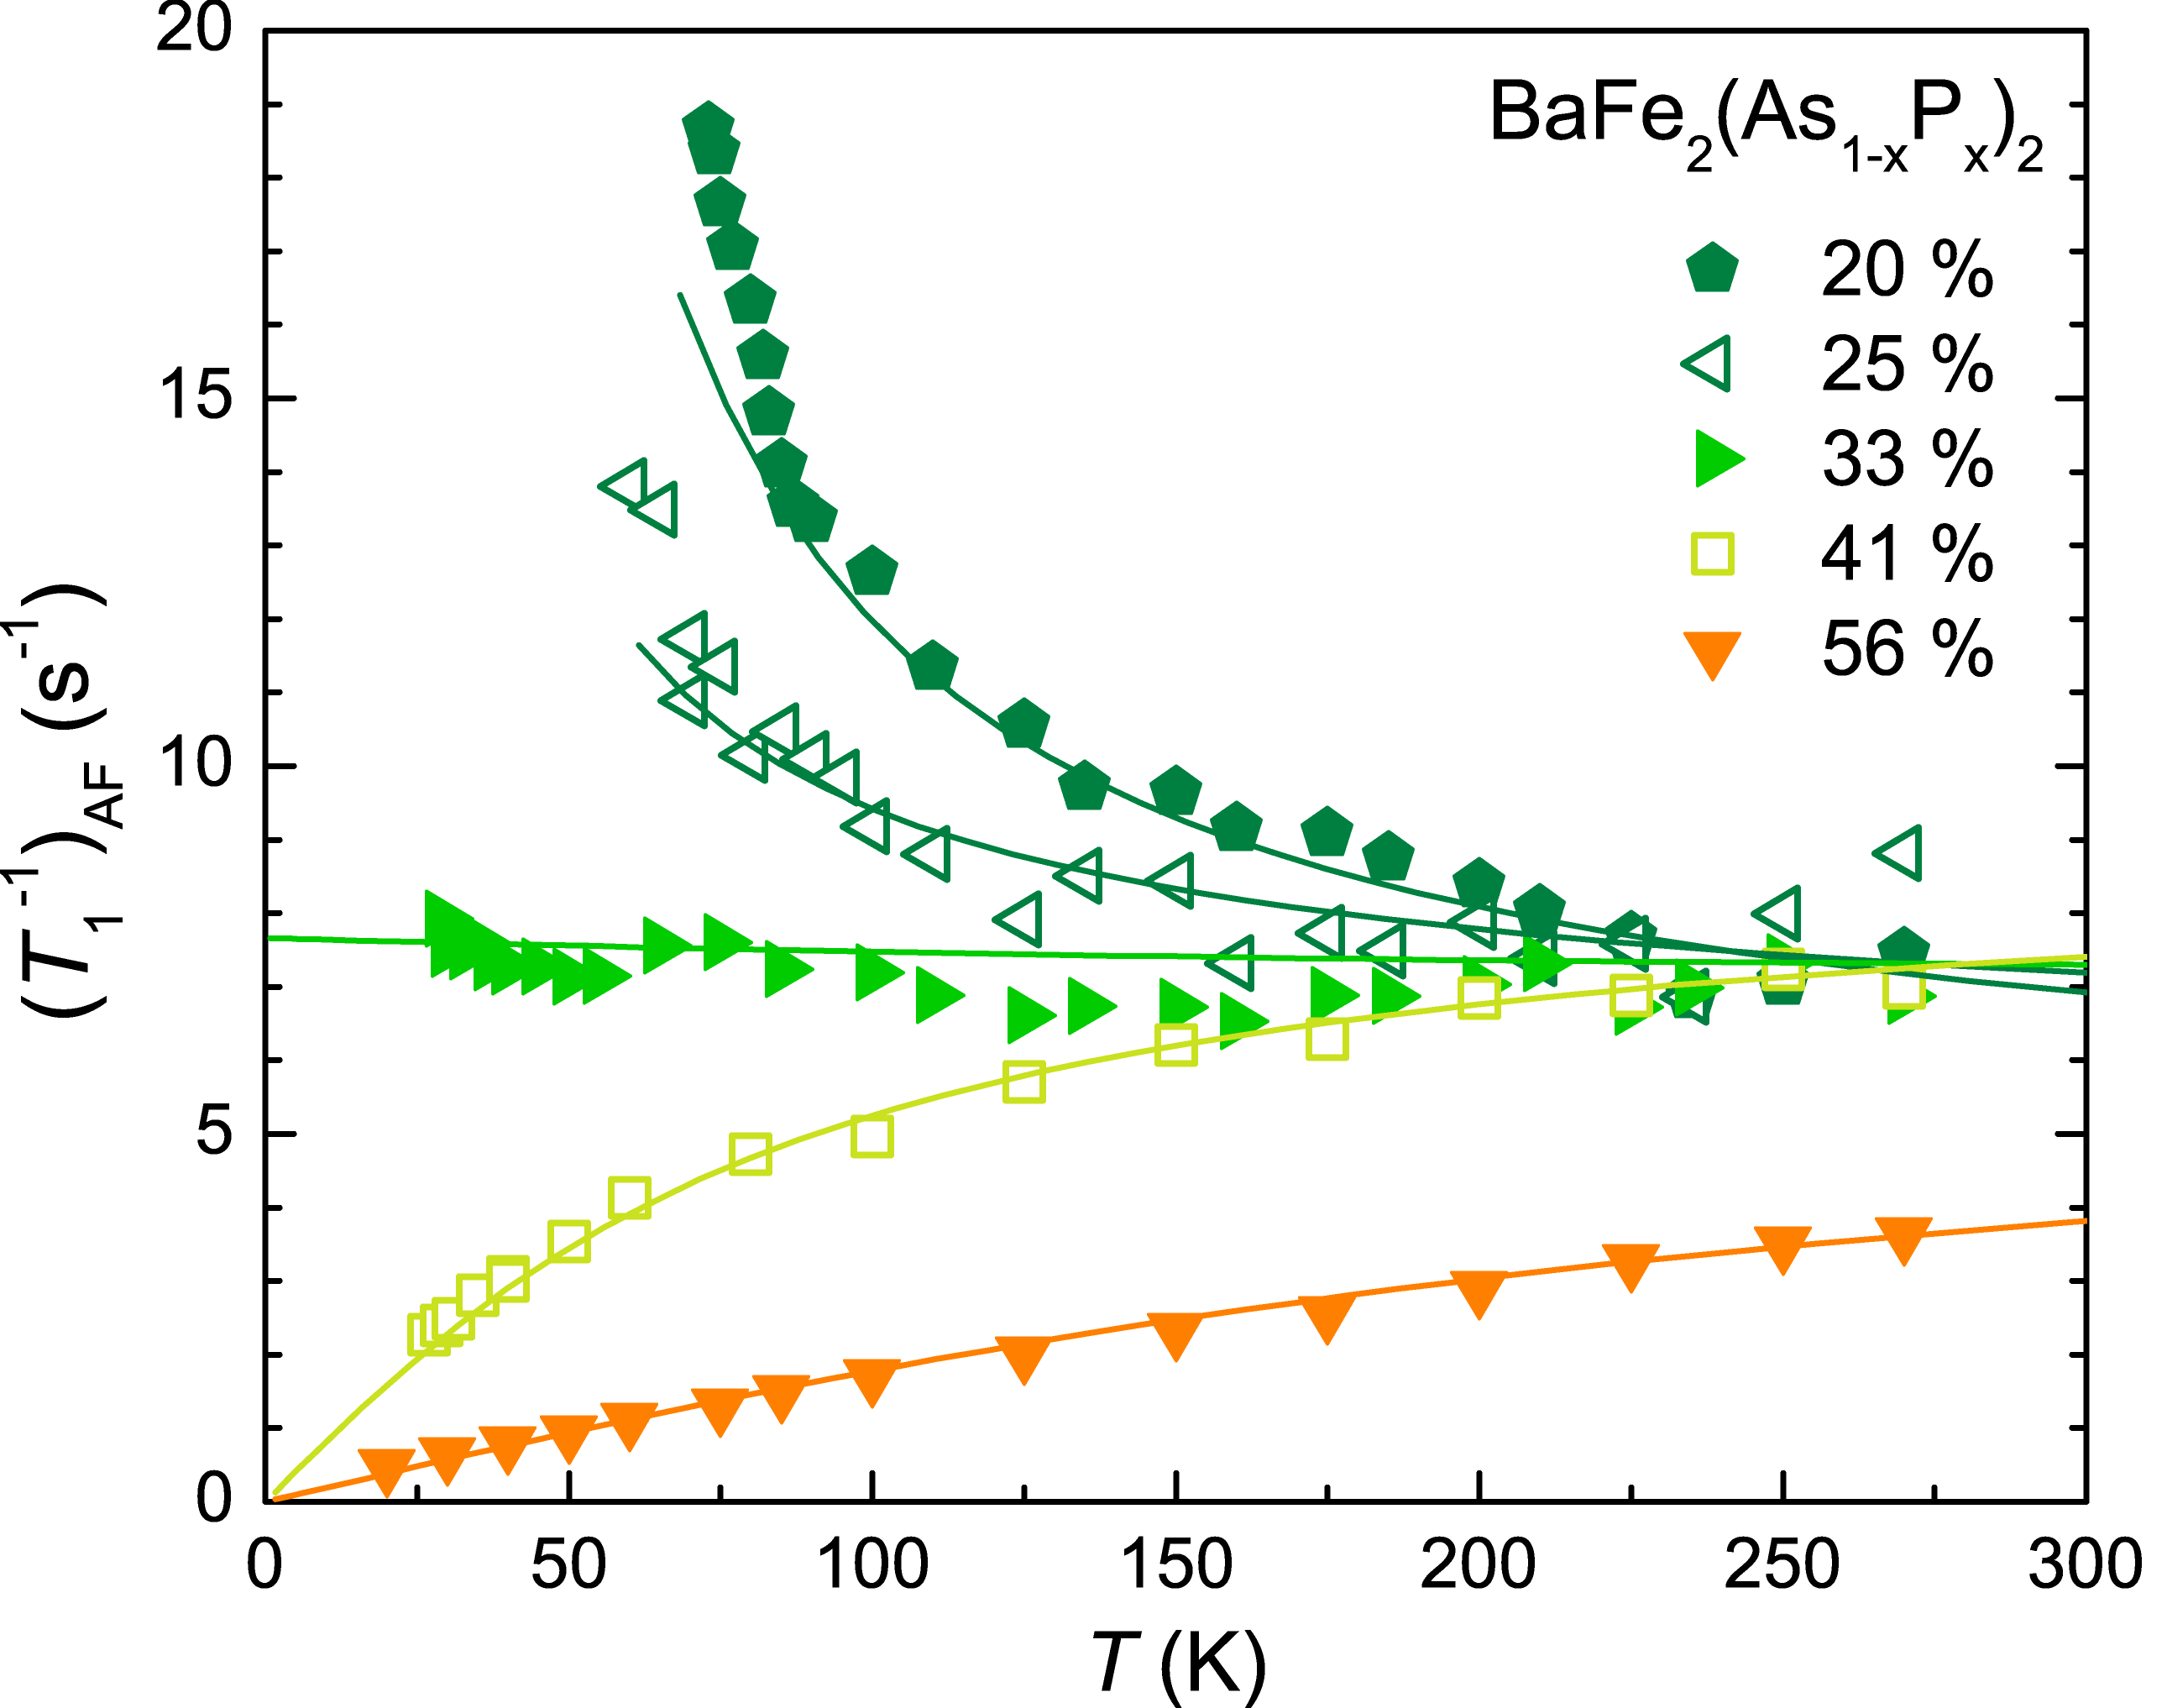 Antiferromagnetic fluctuations of iron-based superconductors